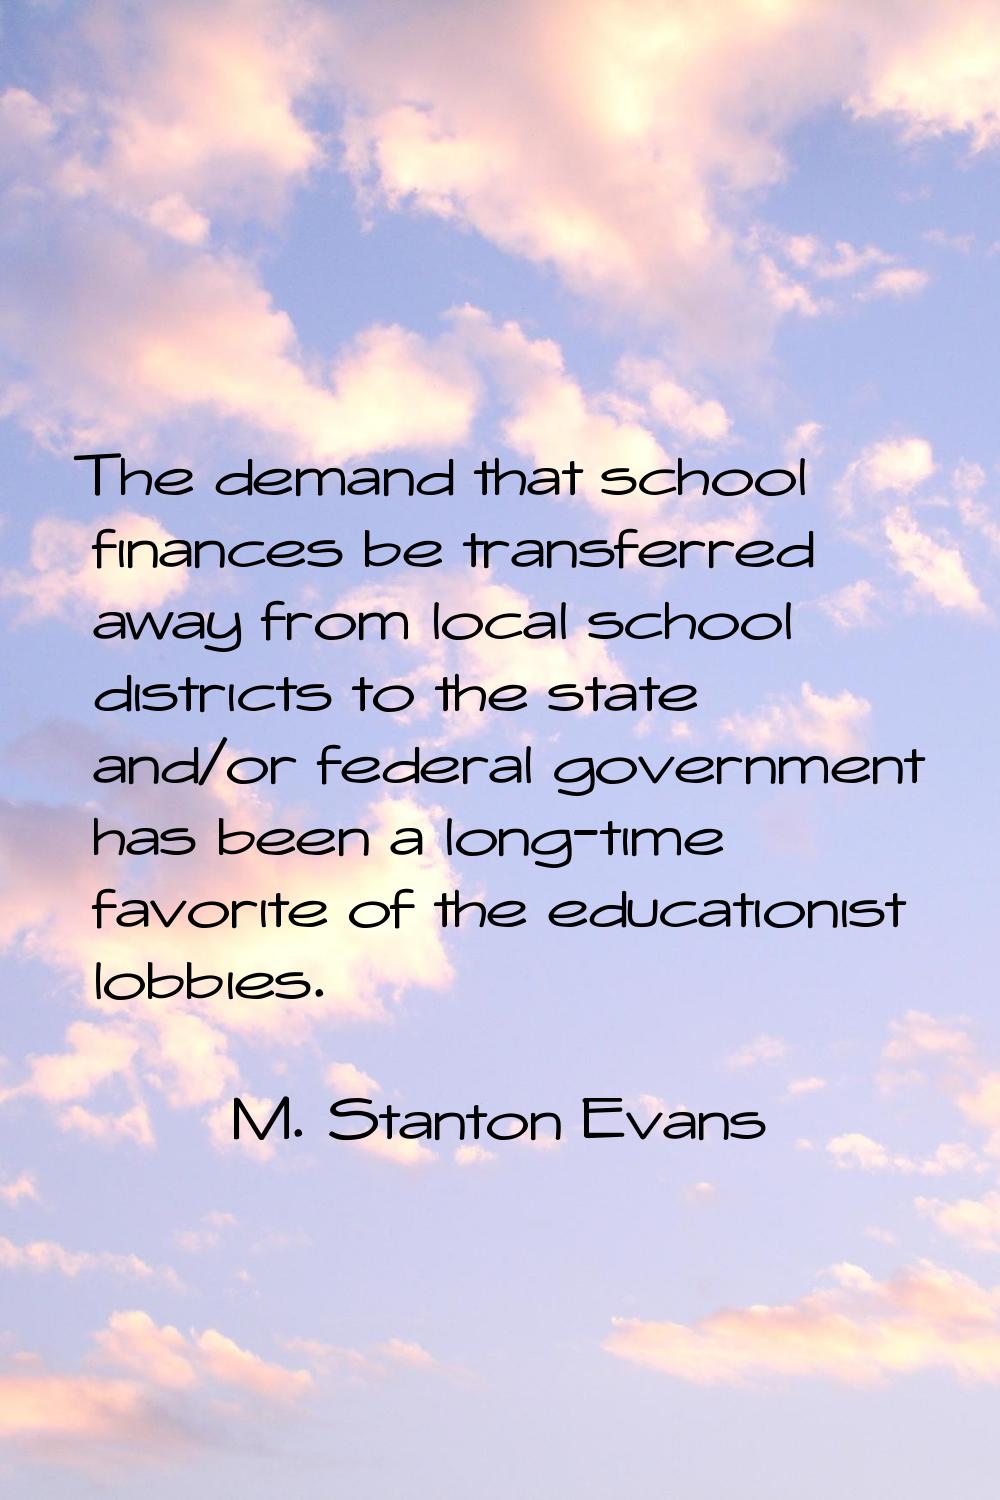 The demand that school finances be transferred away from local school districts to the state and/or